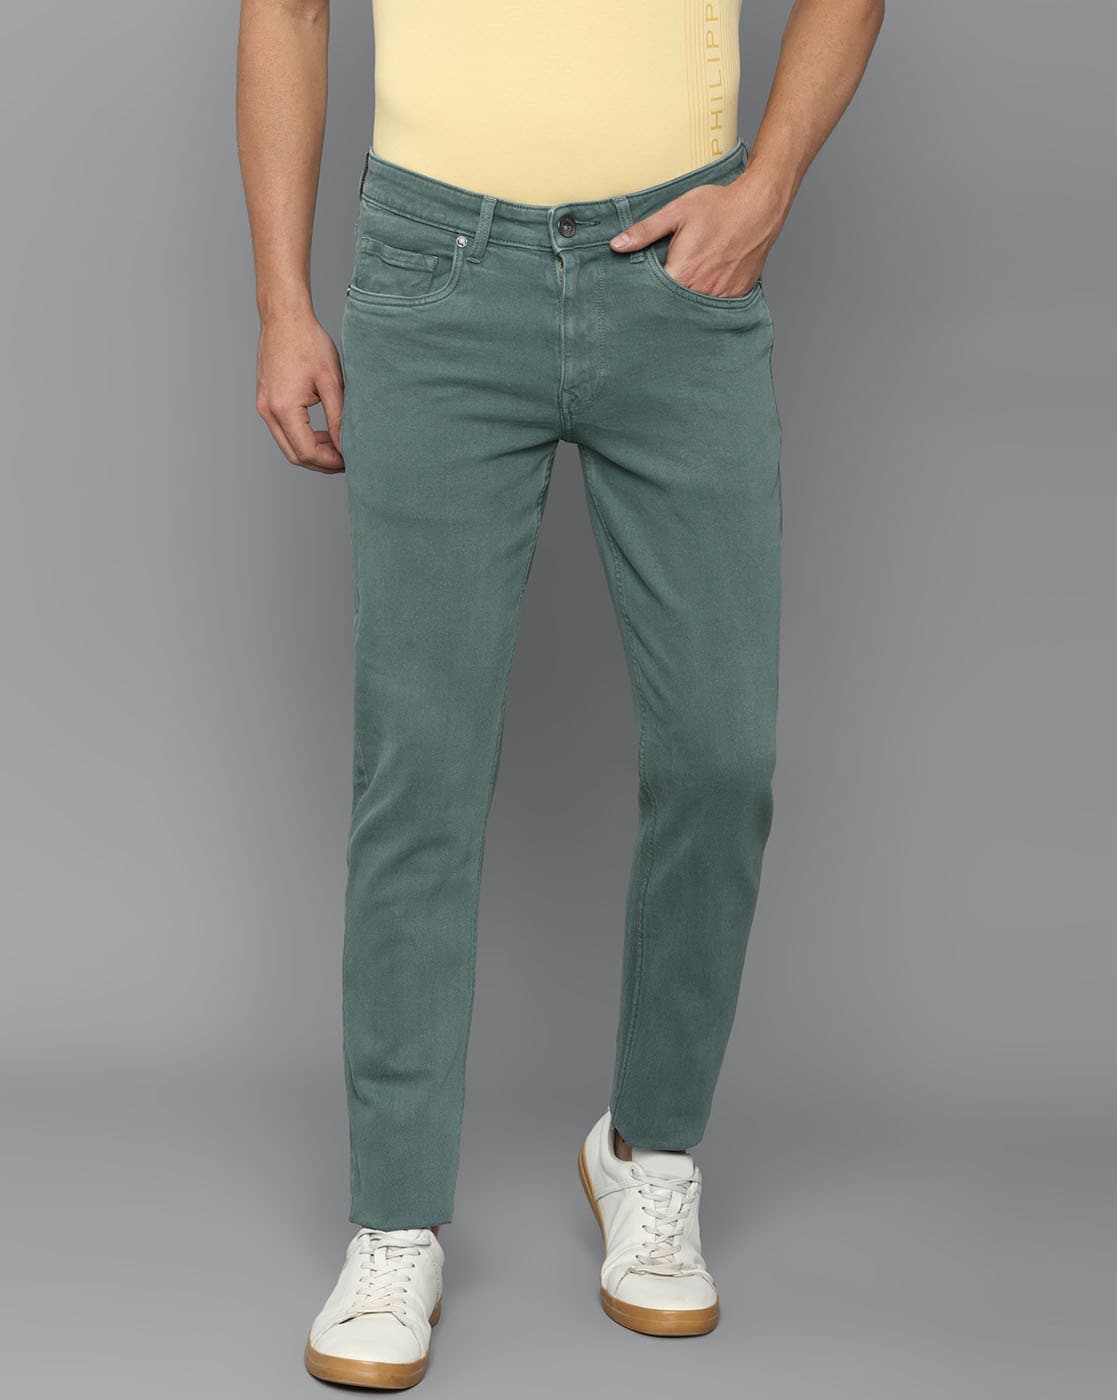 Slim Fit Jeans with Insert Pockets